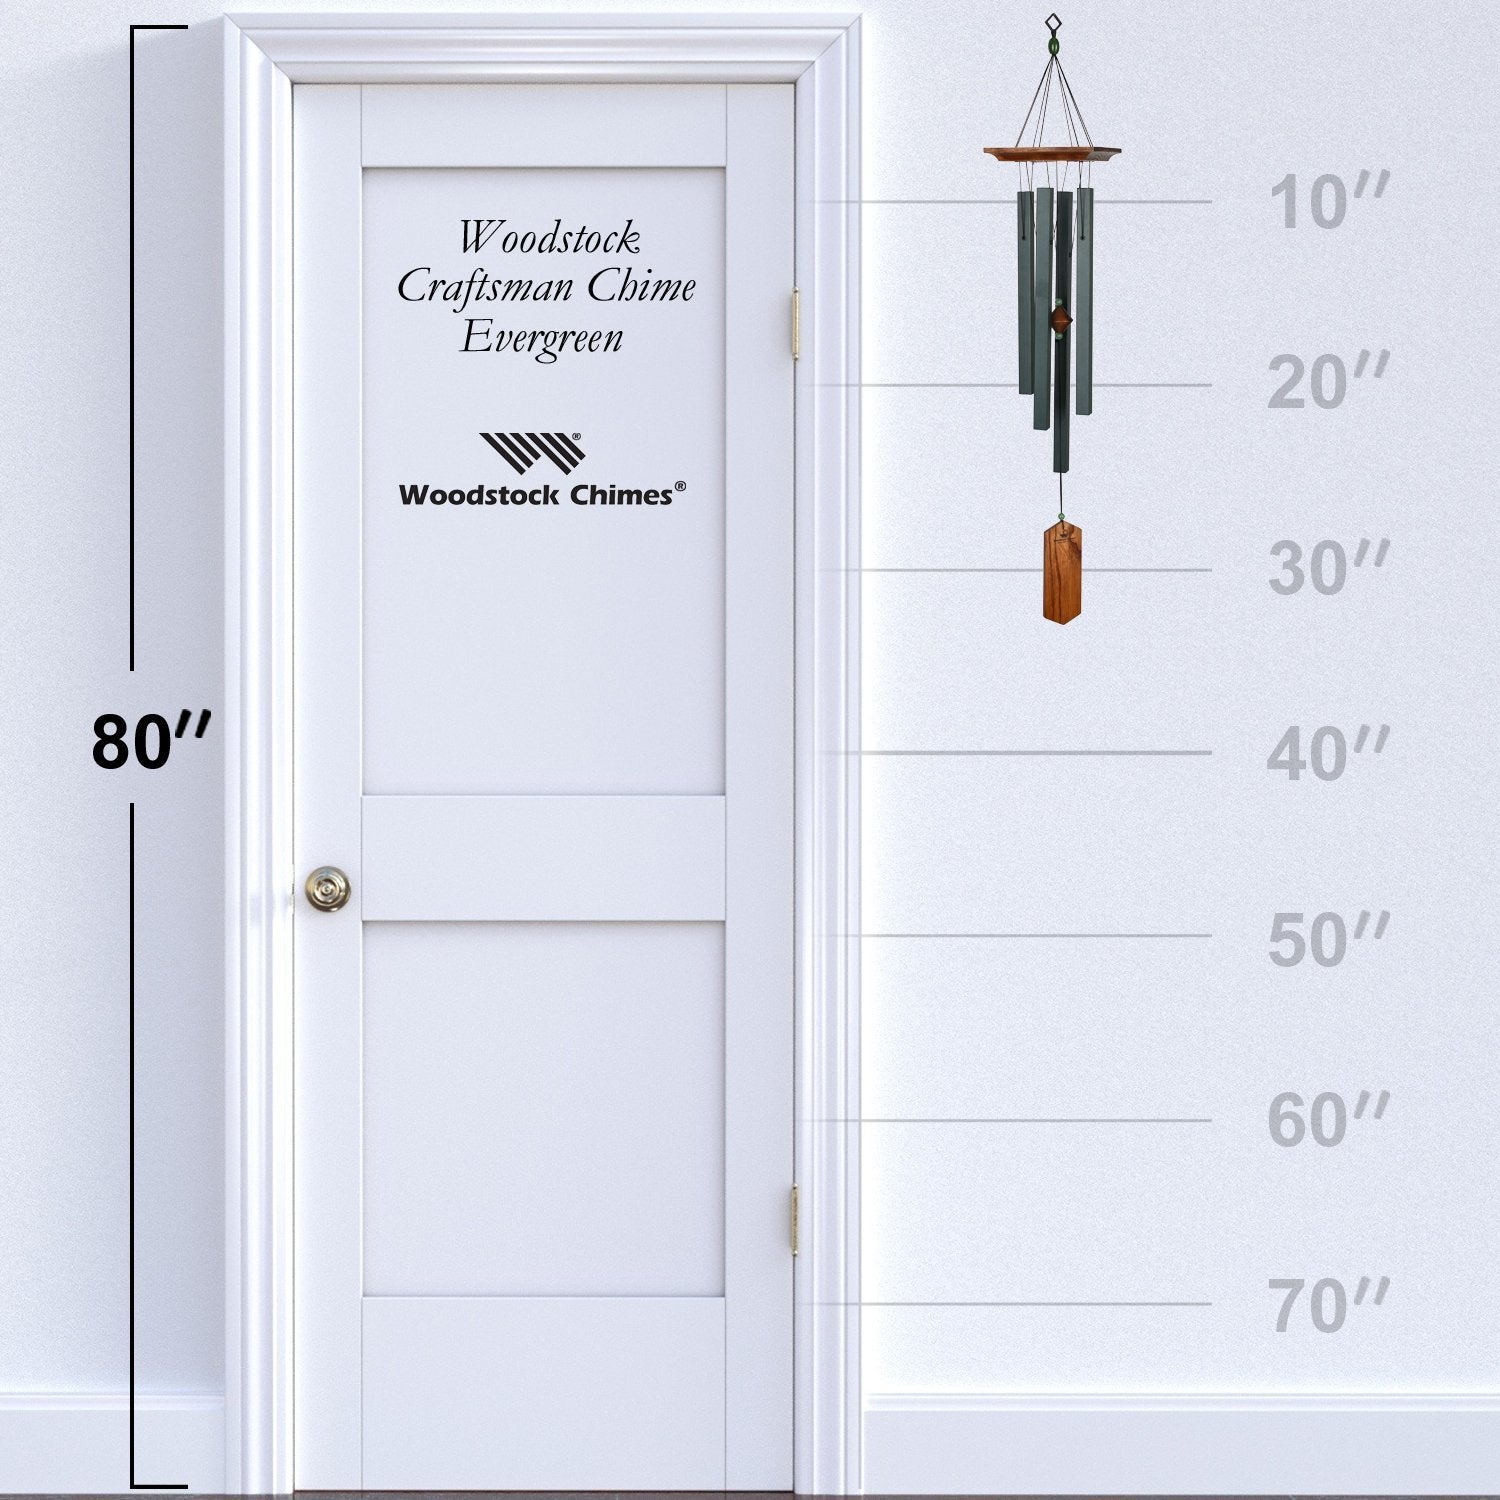 Craftsman Chime - Evergreen proportion image